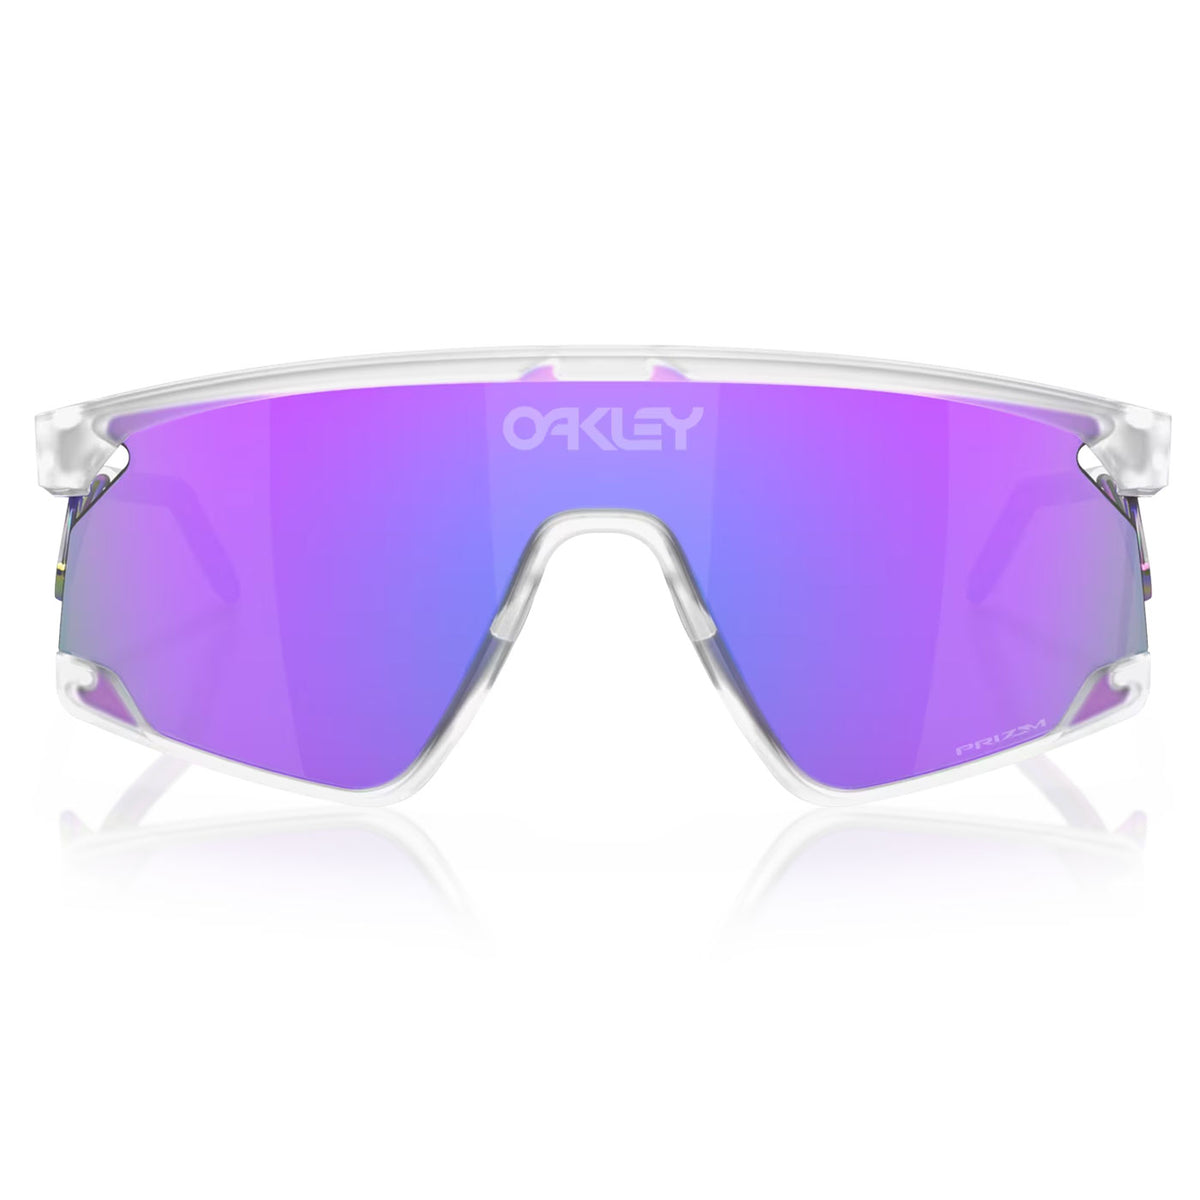 Oakley BXTR Metal sunglasses - Clear prizm violet – All4cycling